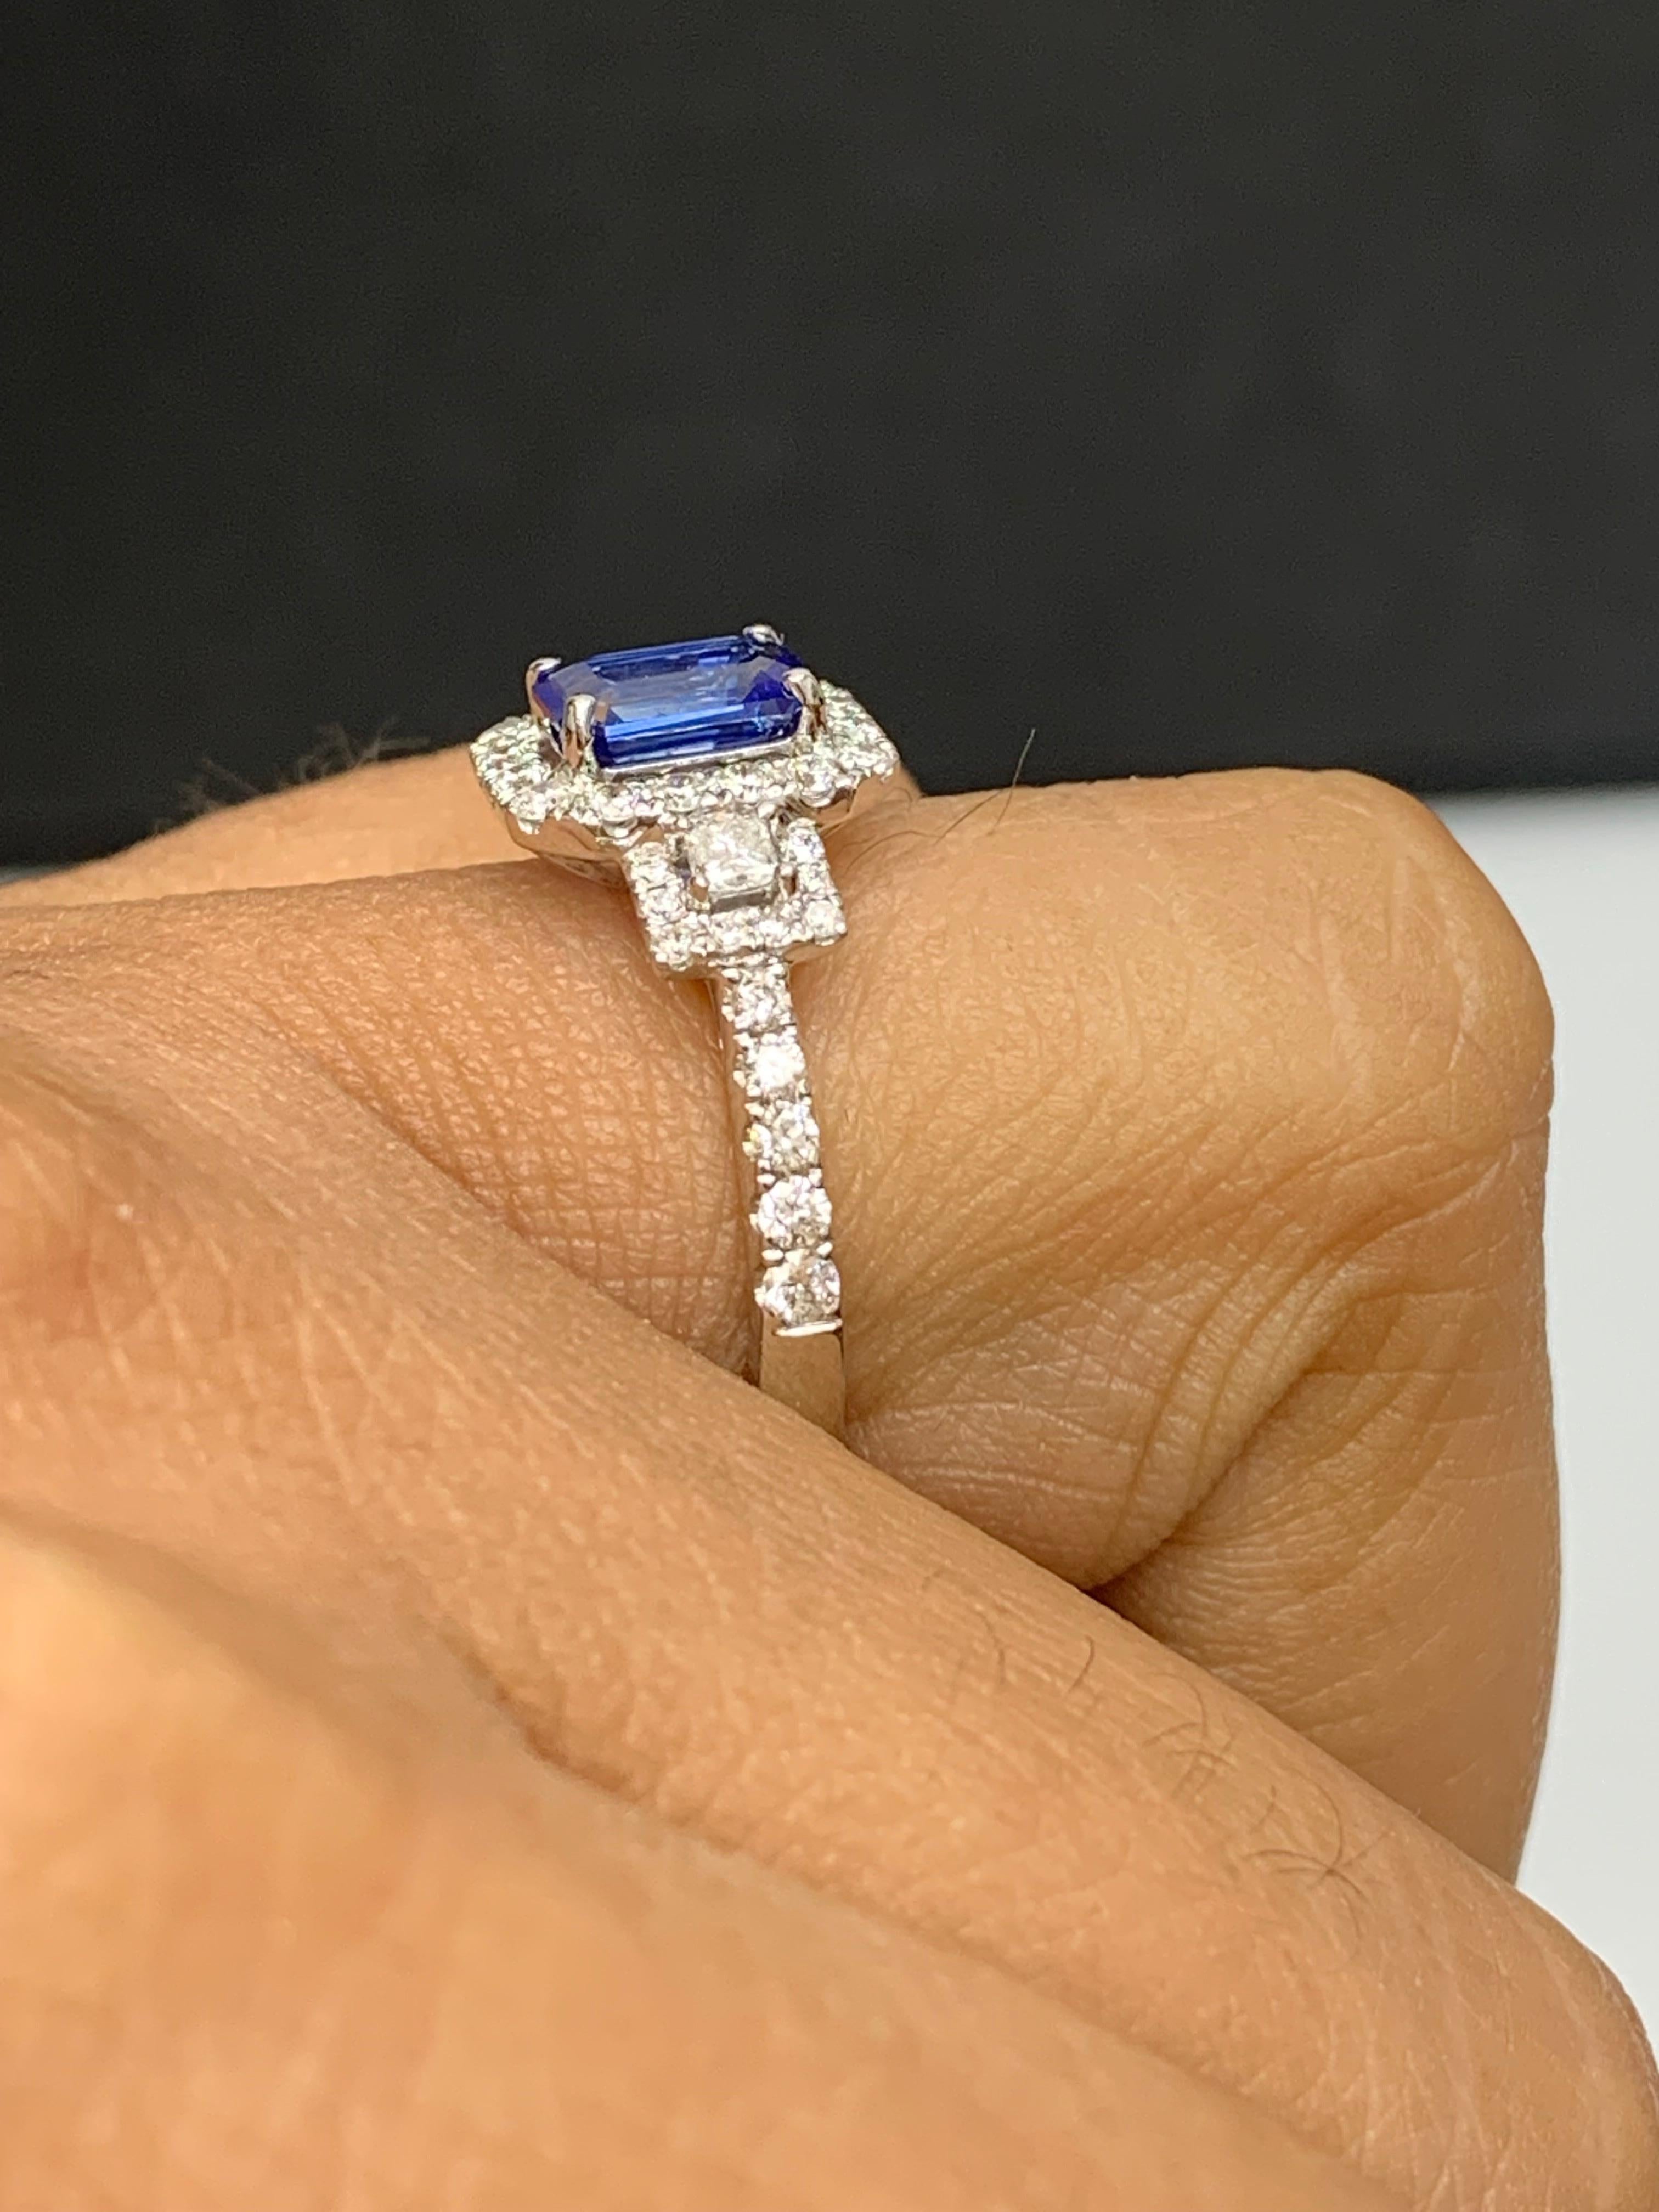 1.21 Carat Emerald Cut Blue Sapphire and Diamond Halo Ring in 18K White Gold For Sale 1